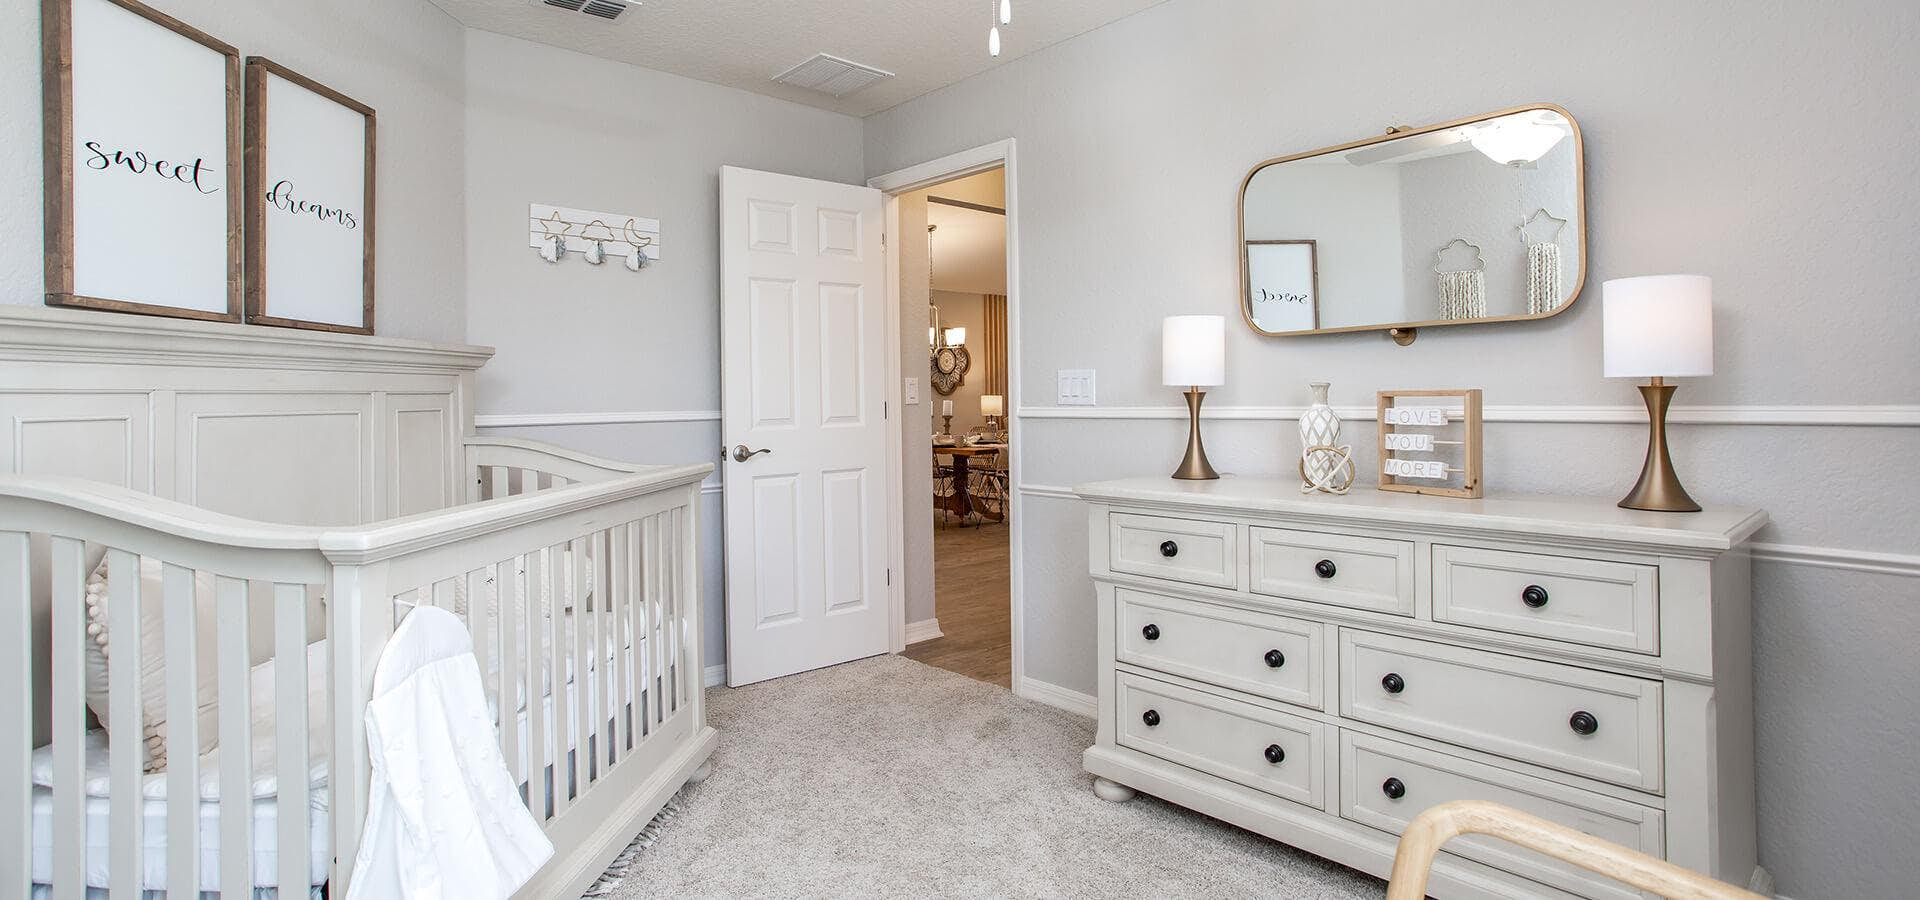 Nursery in a new construction home in Davenport, FL